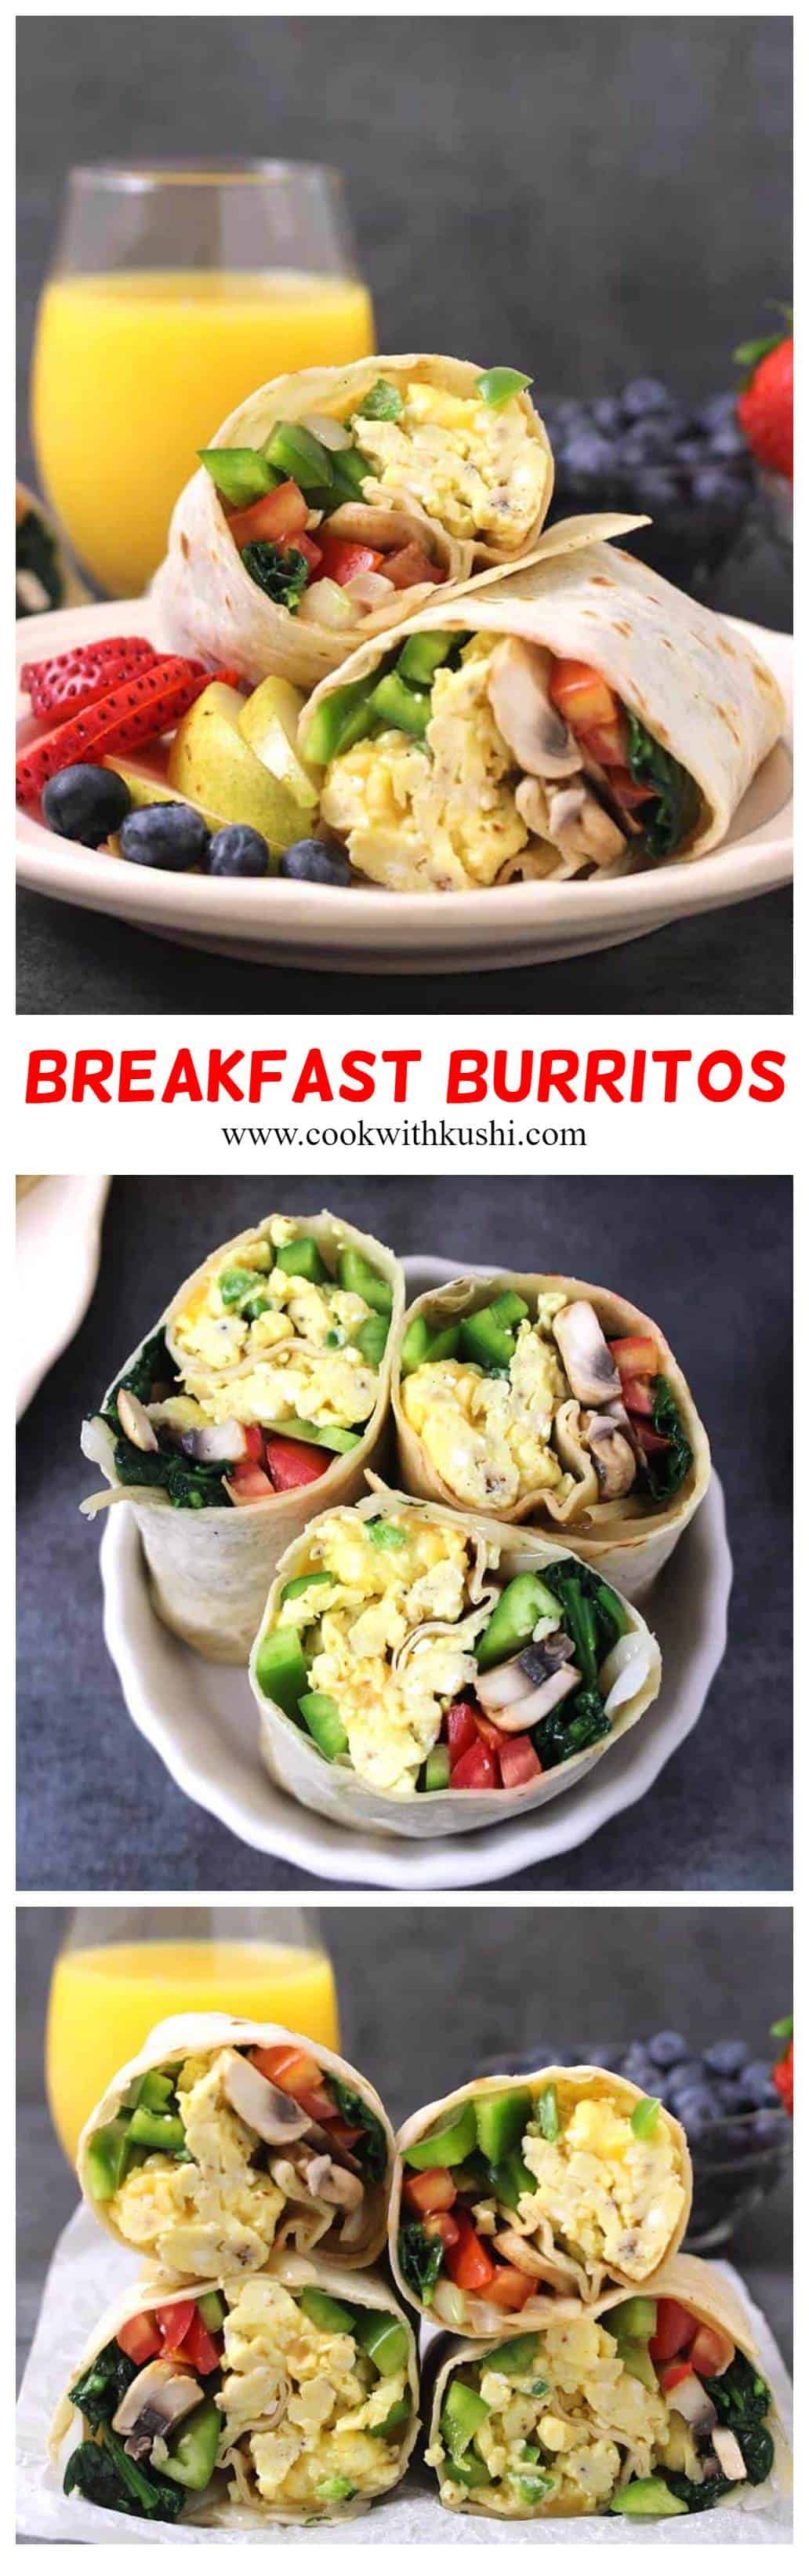 Easy Breakfast Burritos are healthy, protein packed, colorful breakfast recipe that are filling, one of the best breakfast option to kick start your day on a  busy morning. #workdaybreakfast #weekdaybreakfast #makeaheadbreakfast #burritos #veggieburritos #mexicanfoodrecipes #breakfastburritos #groundbeefburrito 